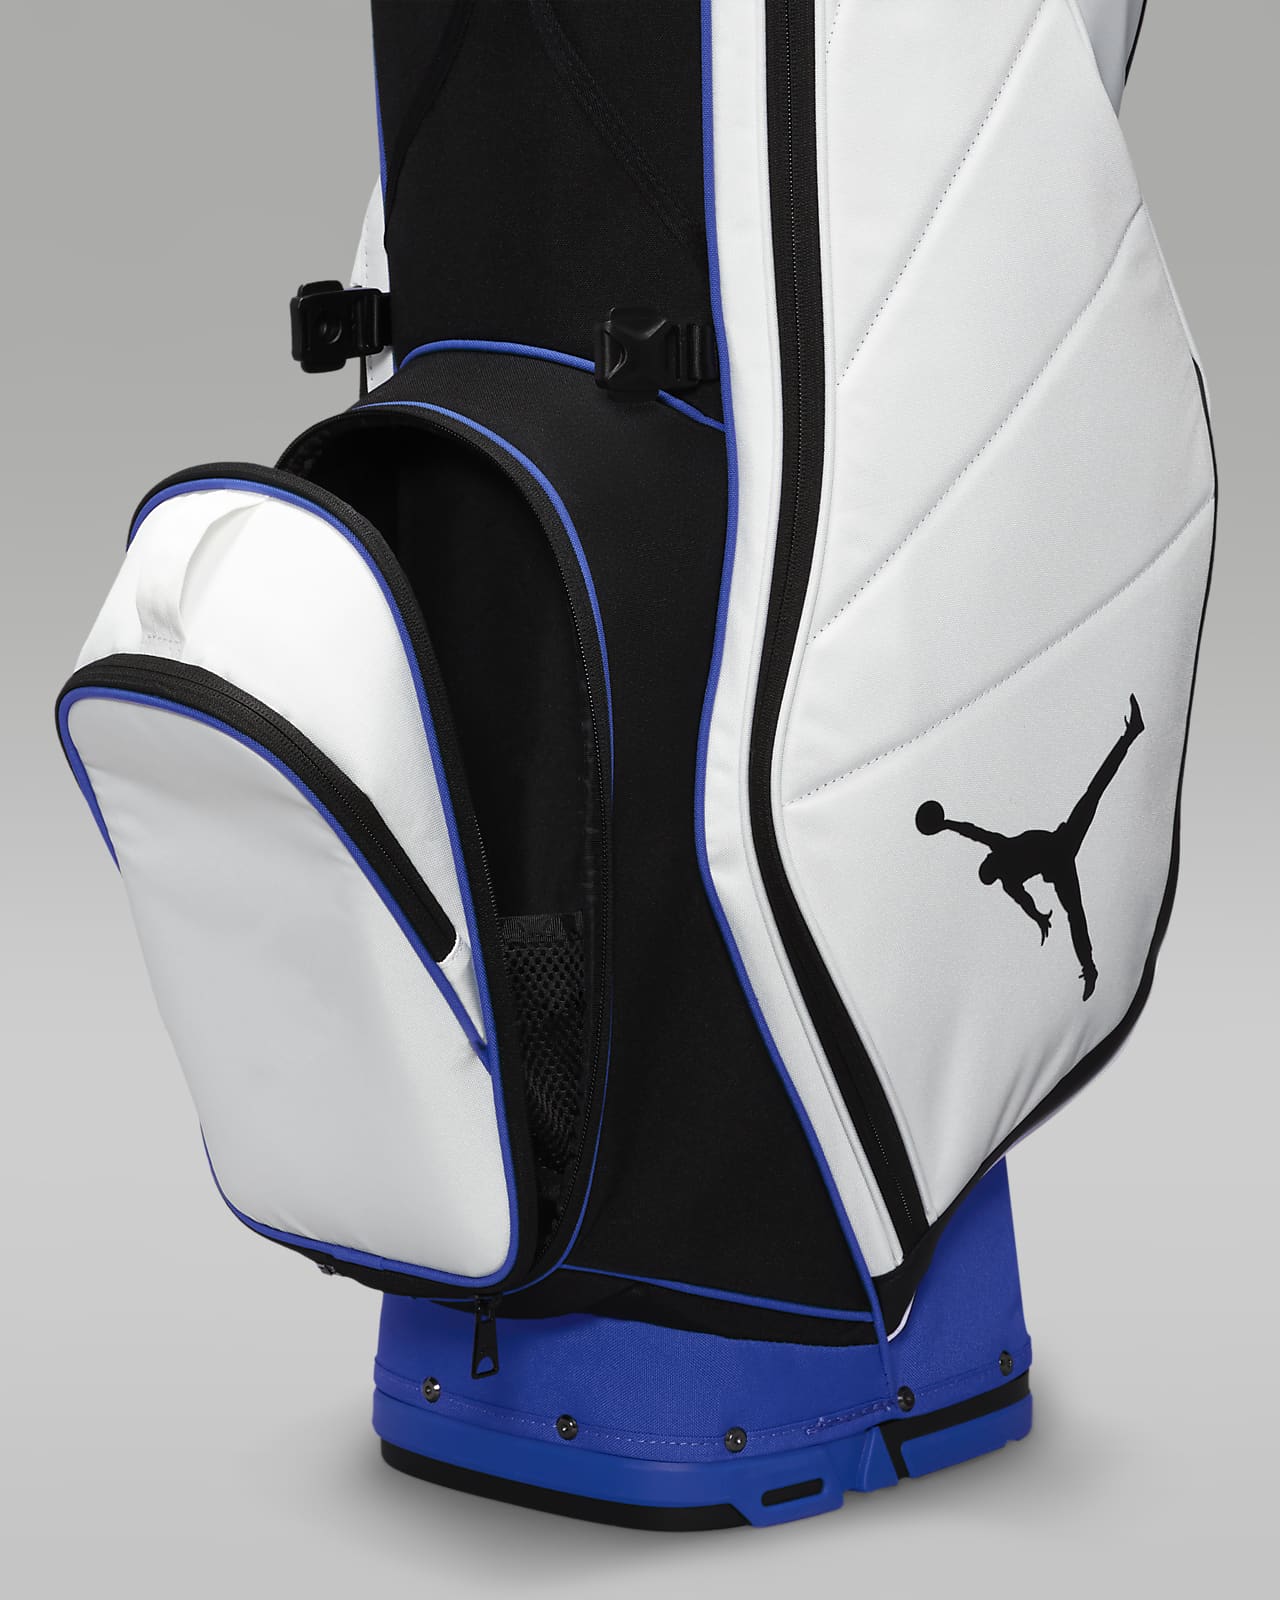 I WISH I HAD KNOWN about this Golf Cart Bag? 